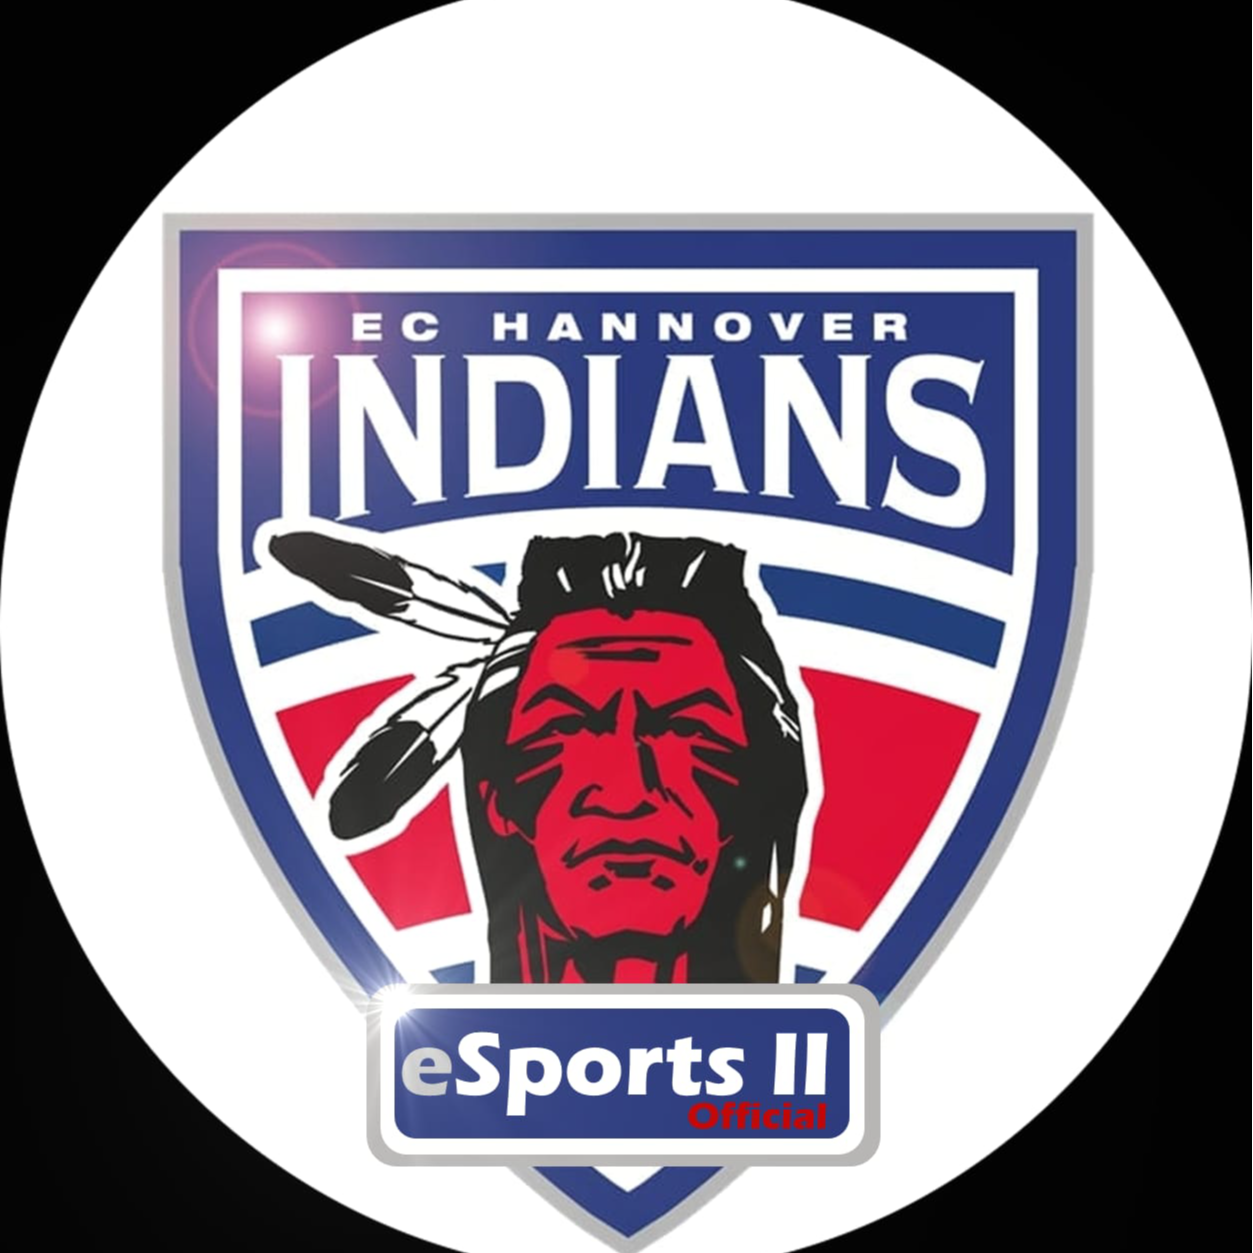 Hannover Indians eSports2